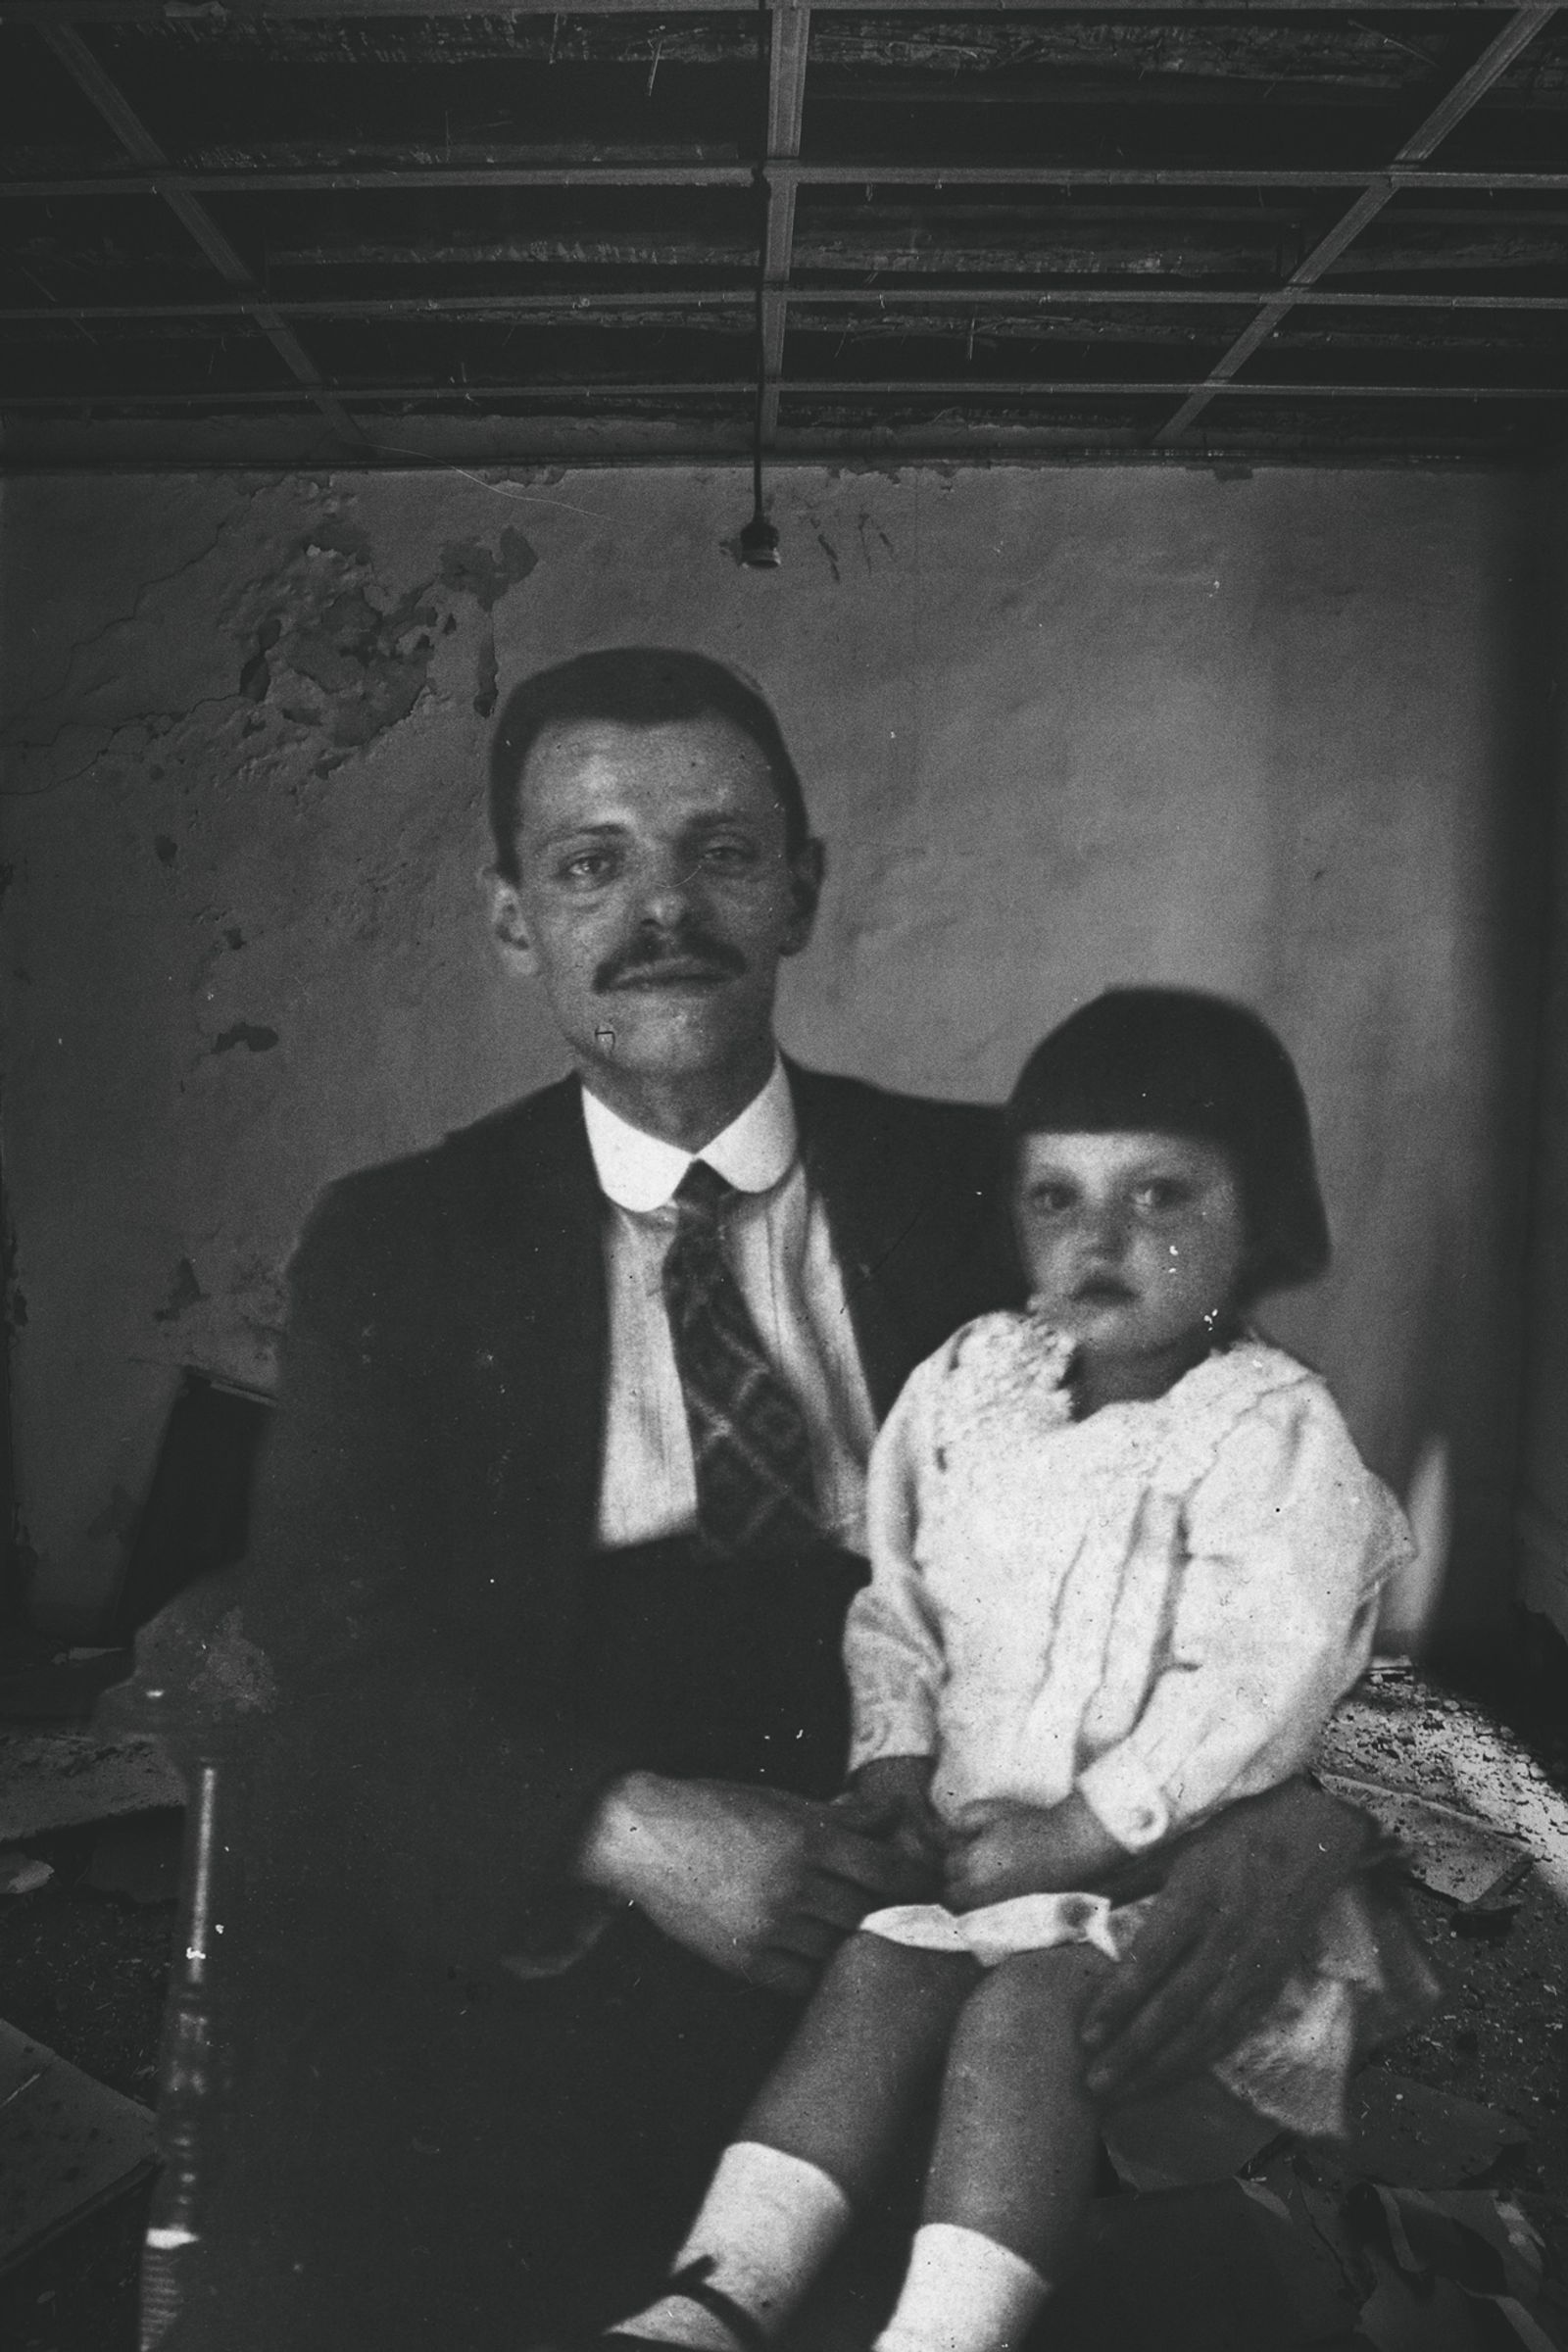 © BARBARA ZANON - Elsa with her father in the 1914